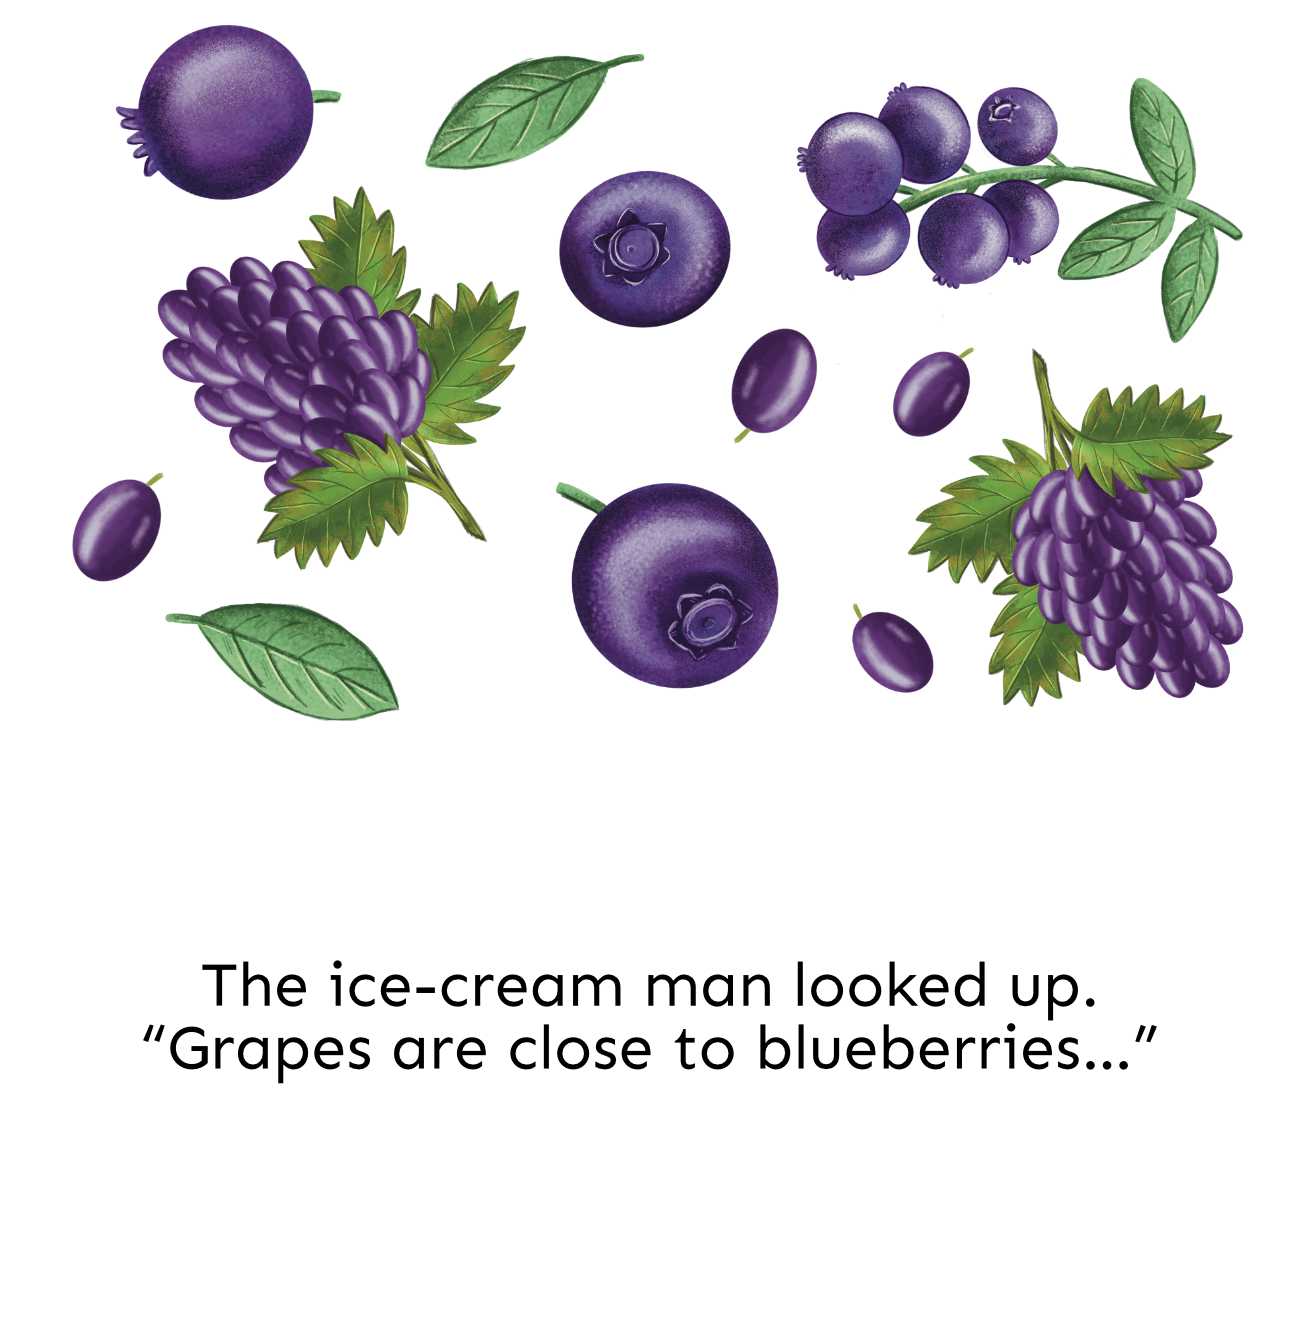 Bedtime Stories The Worlds Best Ice Cream by Jade Maitre short stories for kids page 13